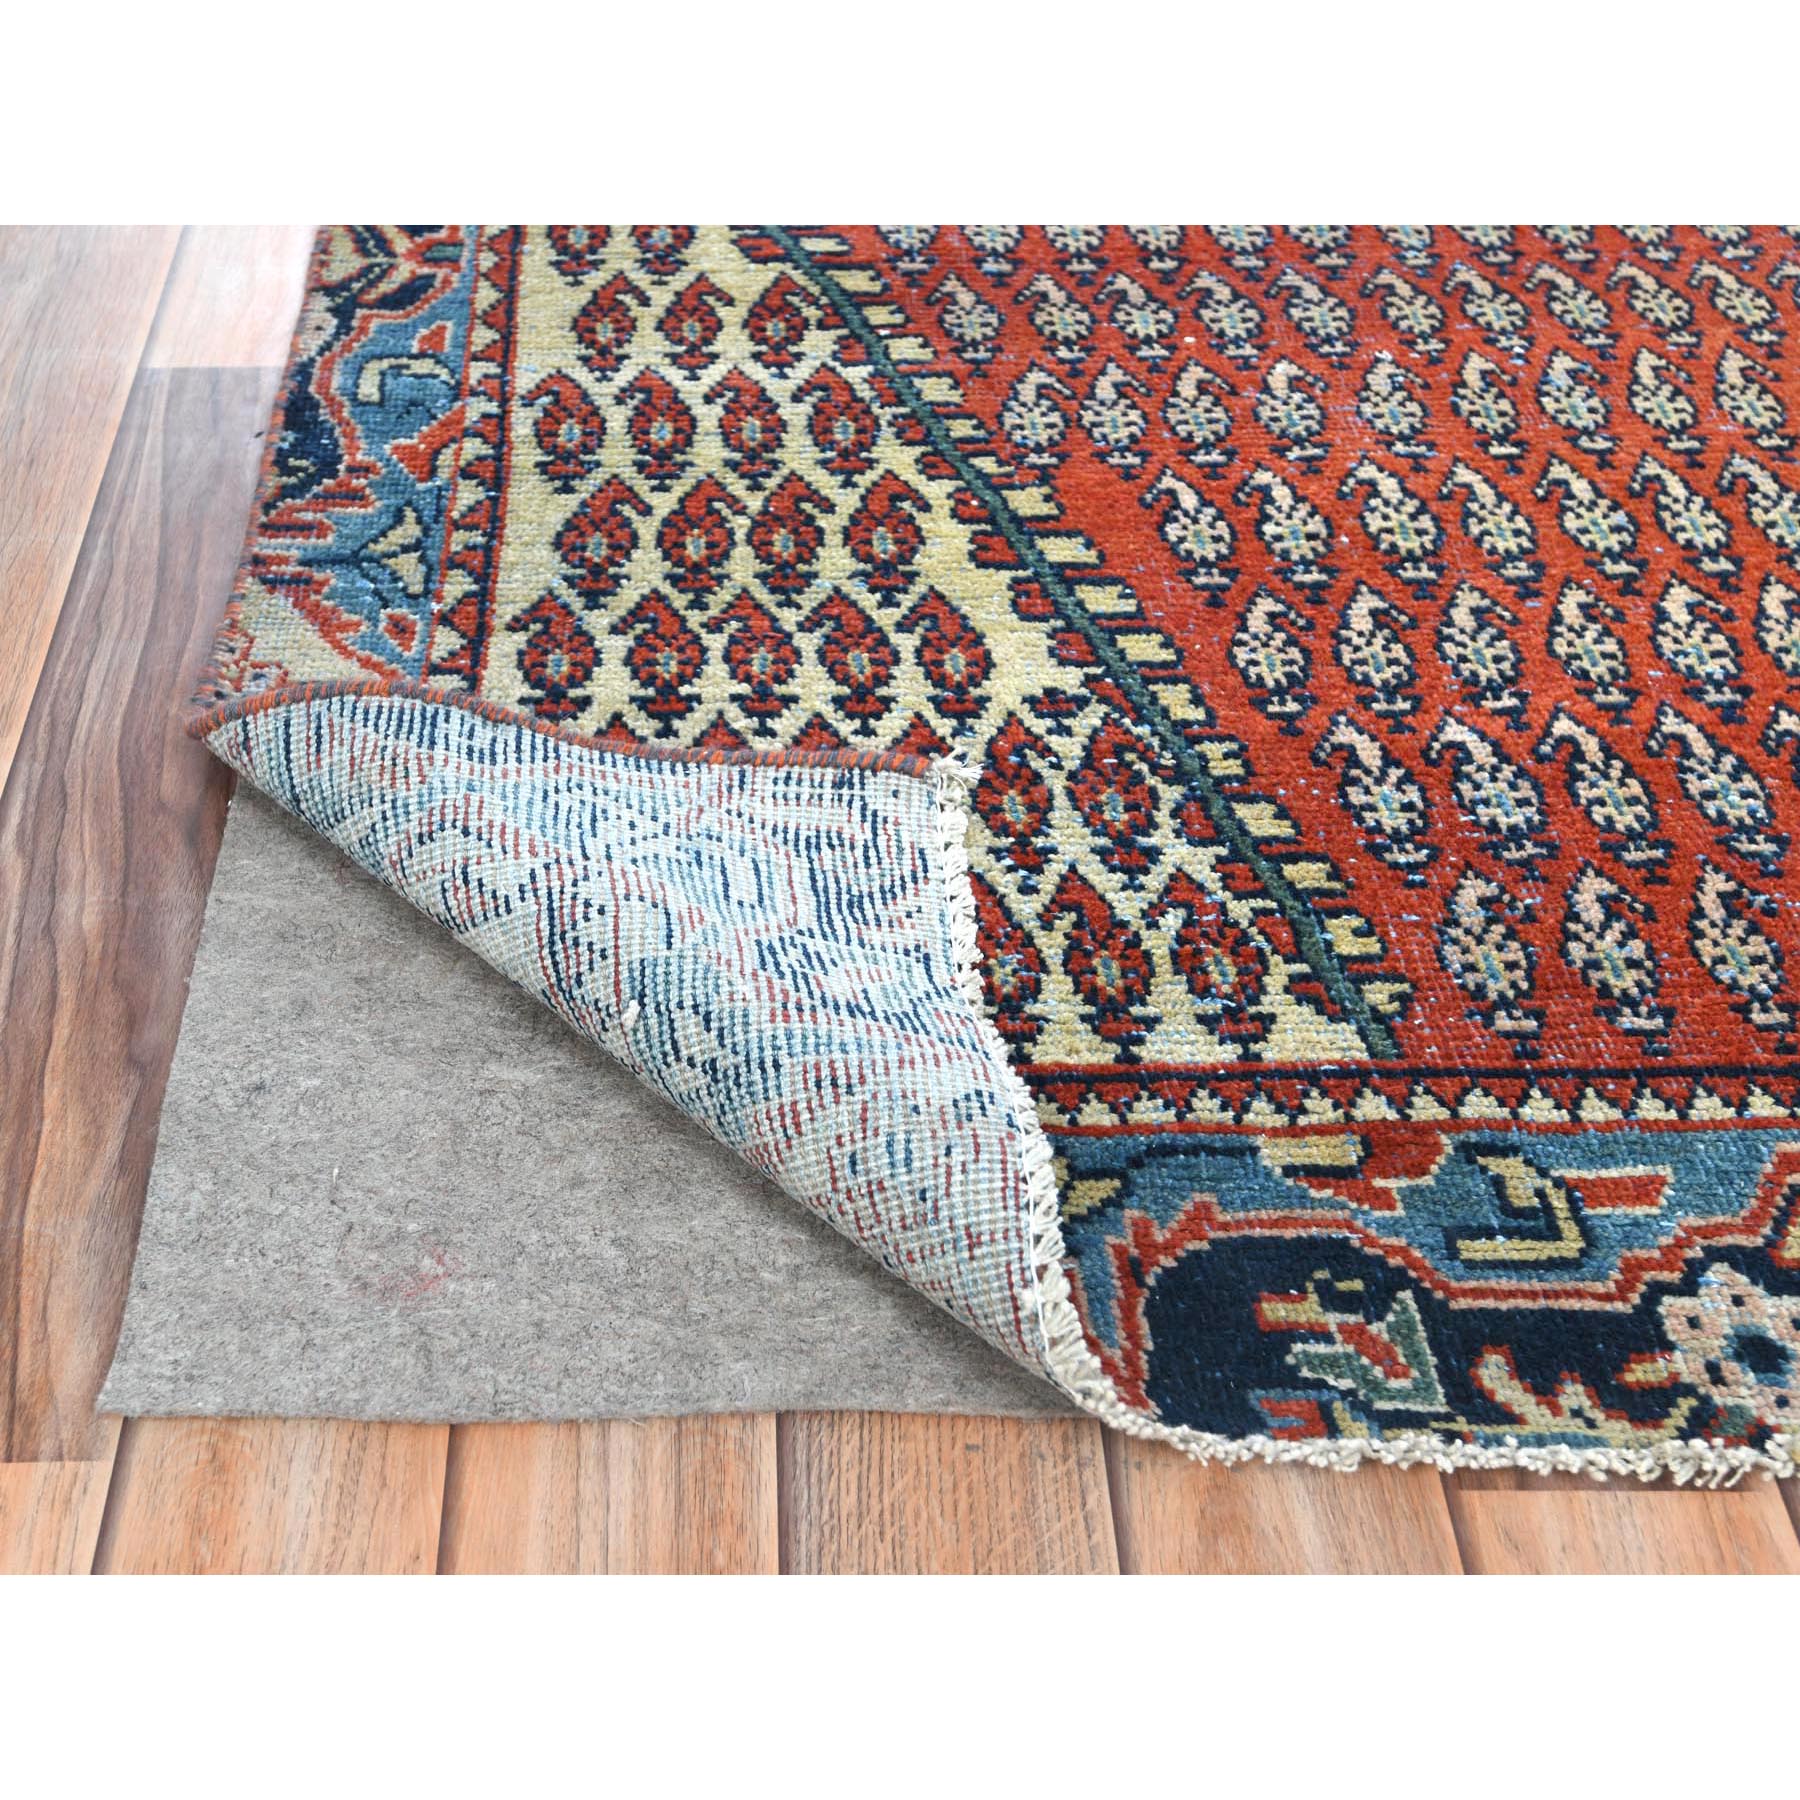 3'7"x9'3" Tomato Red, Pure Wool, Vintage Persian Serab with Small Repetitive Boteh Design, Hand Woven, Worn Down, Distressed Look, Wide Runner Oriental Rug 